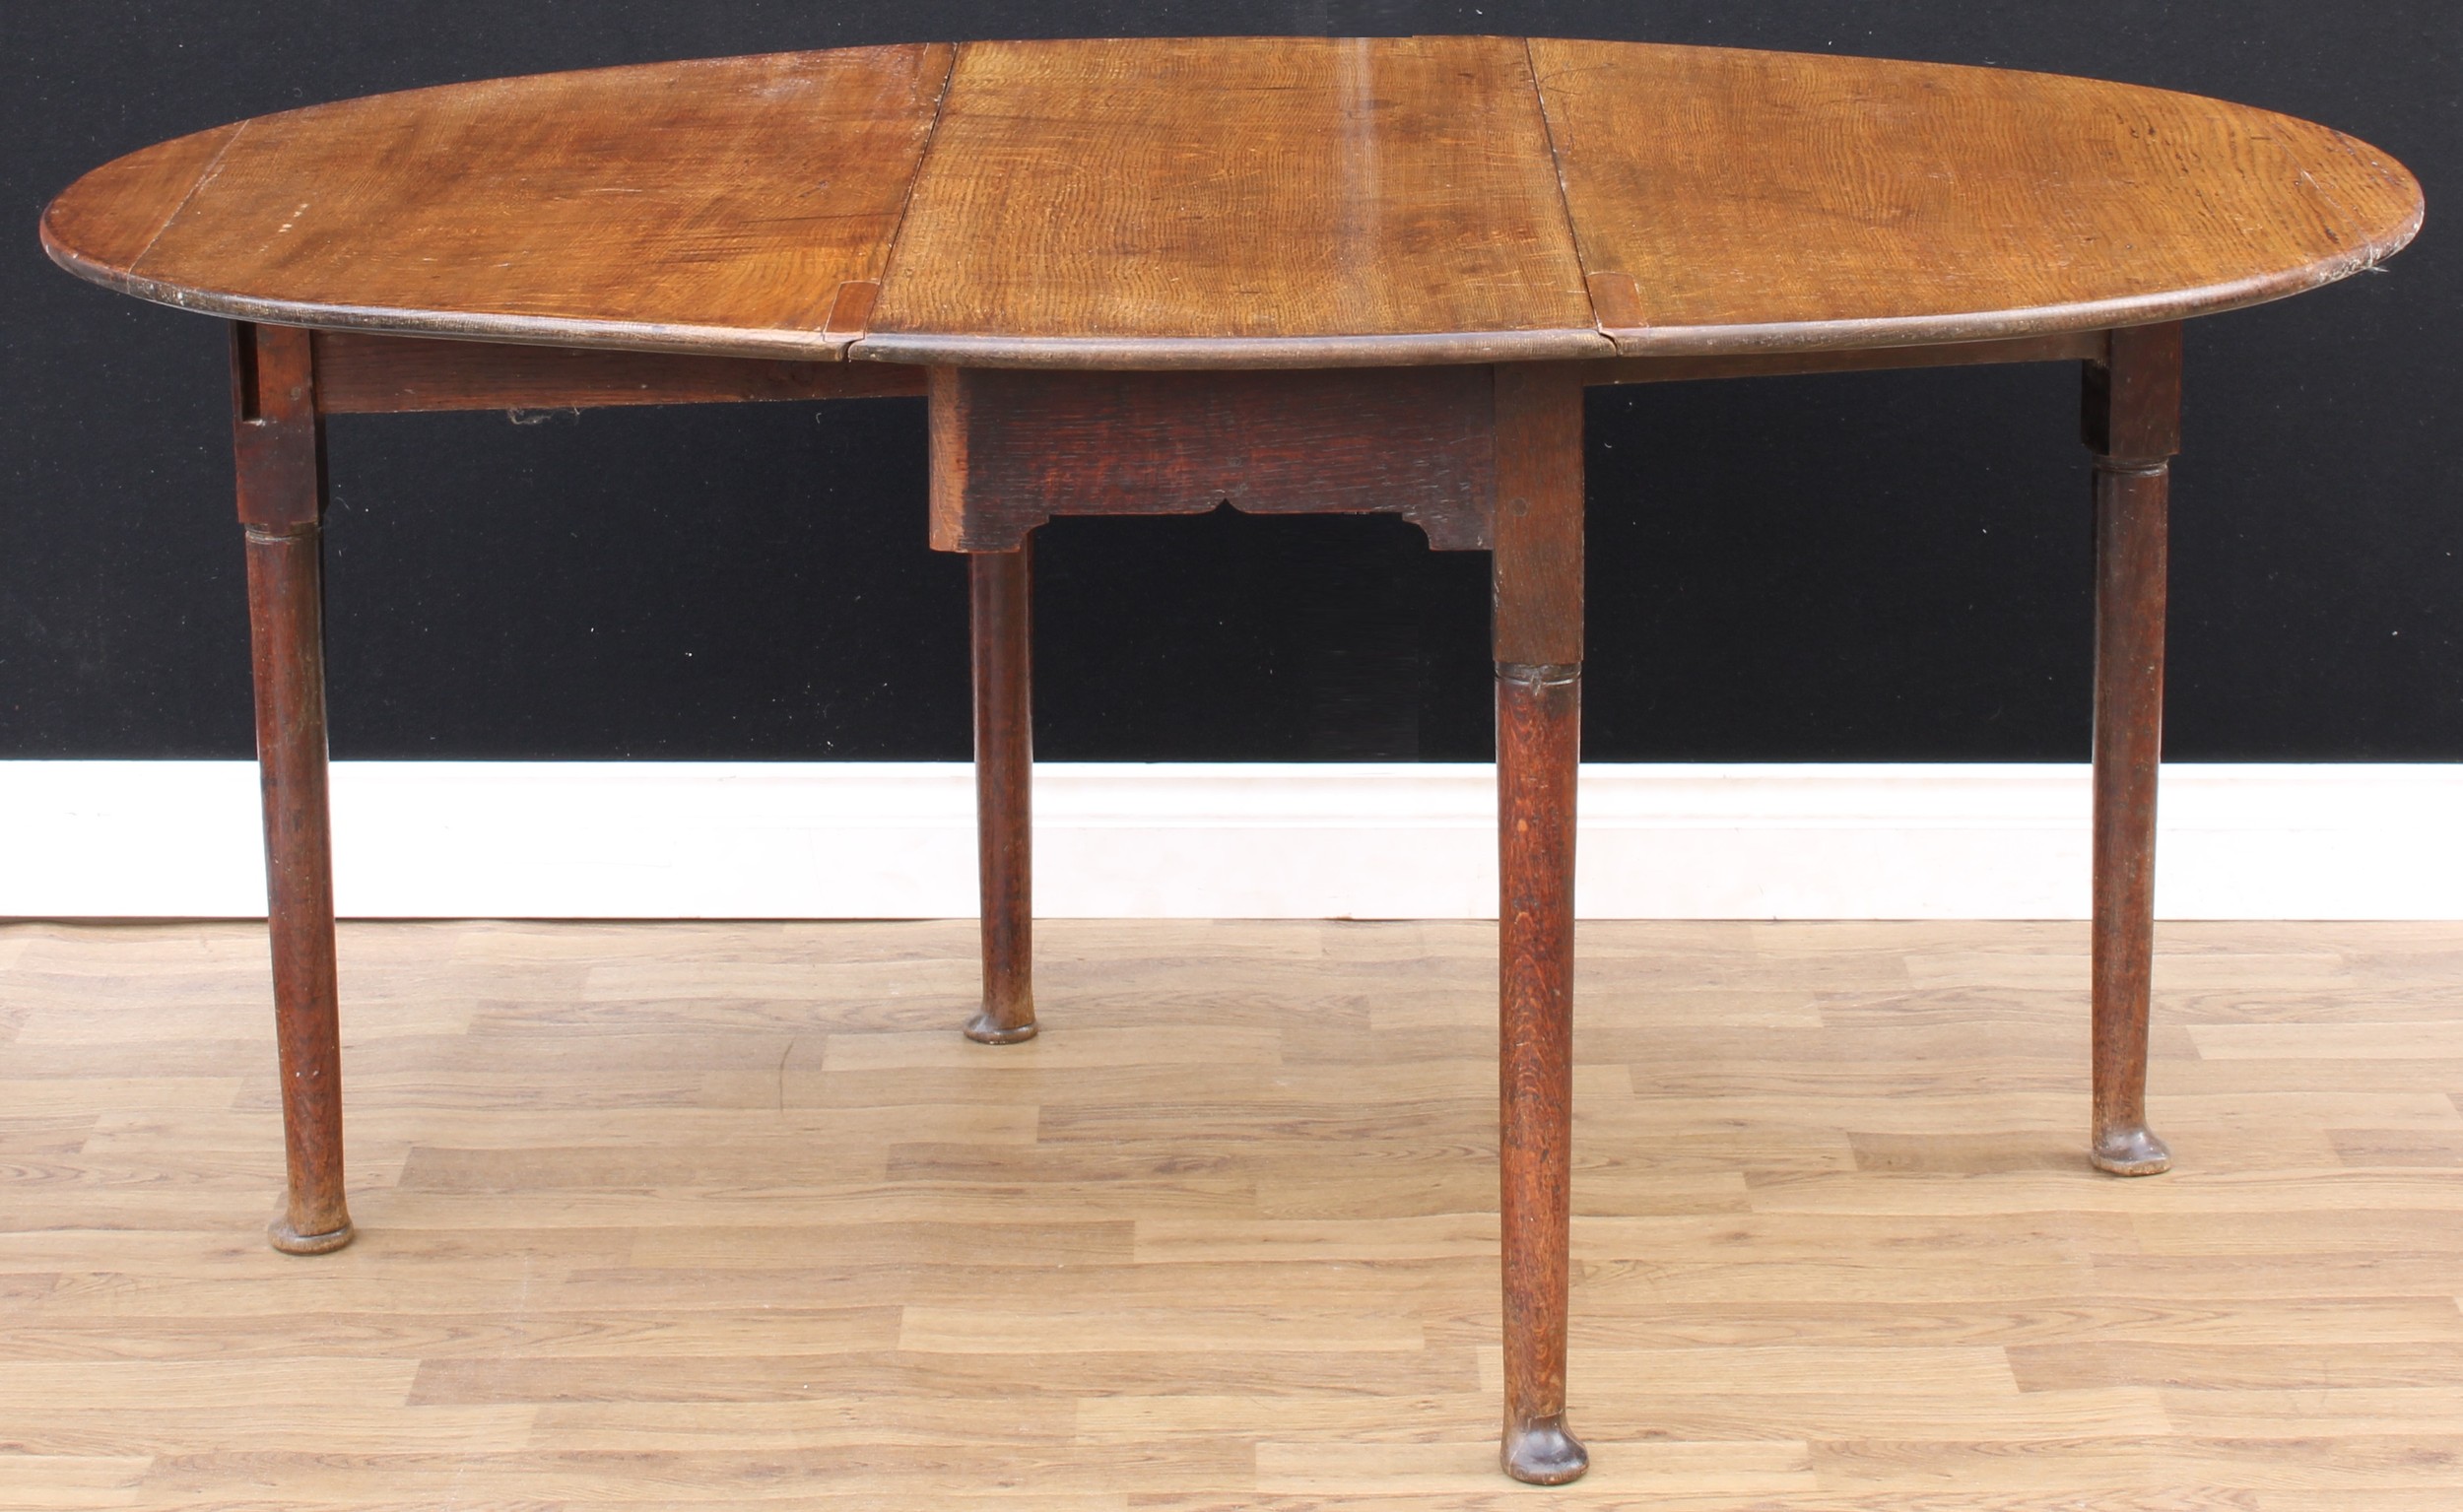 A 'George II' oak gateleg dining table, oval top with fall leaves, cylindrical legs, pad feet, - Image 3 of 3